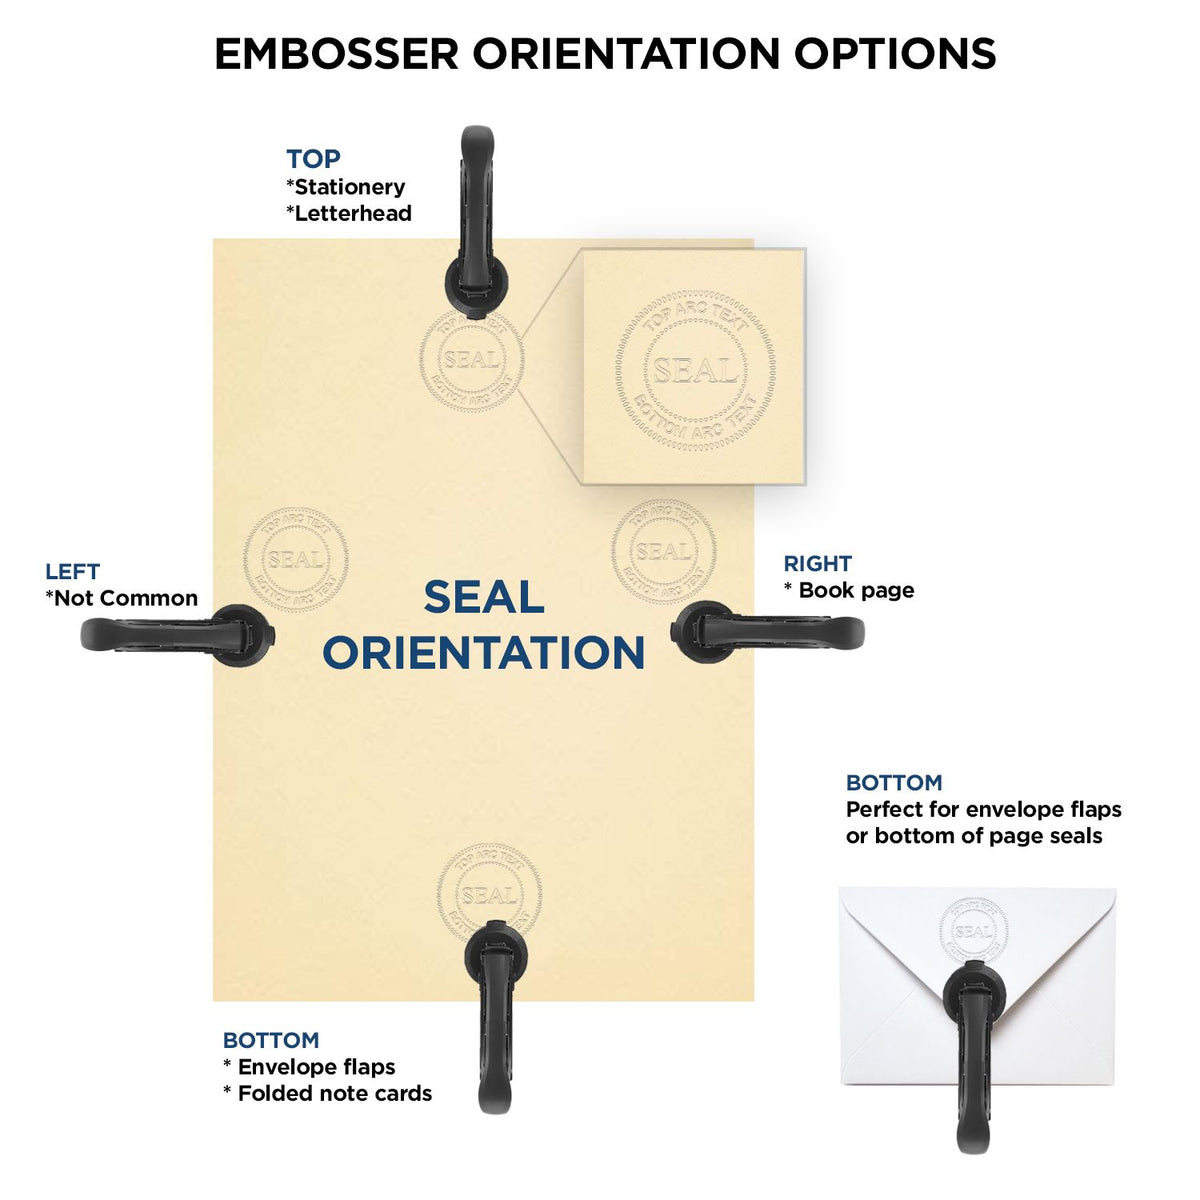 An infographic for the Soft Pocket Mississippi Landscape Architect Embosser showing embosser orientation, this is showing examples of a top, bottom, right and left insert.